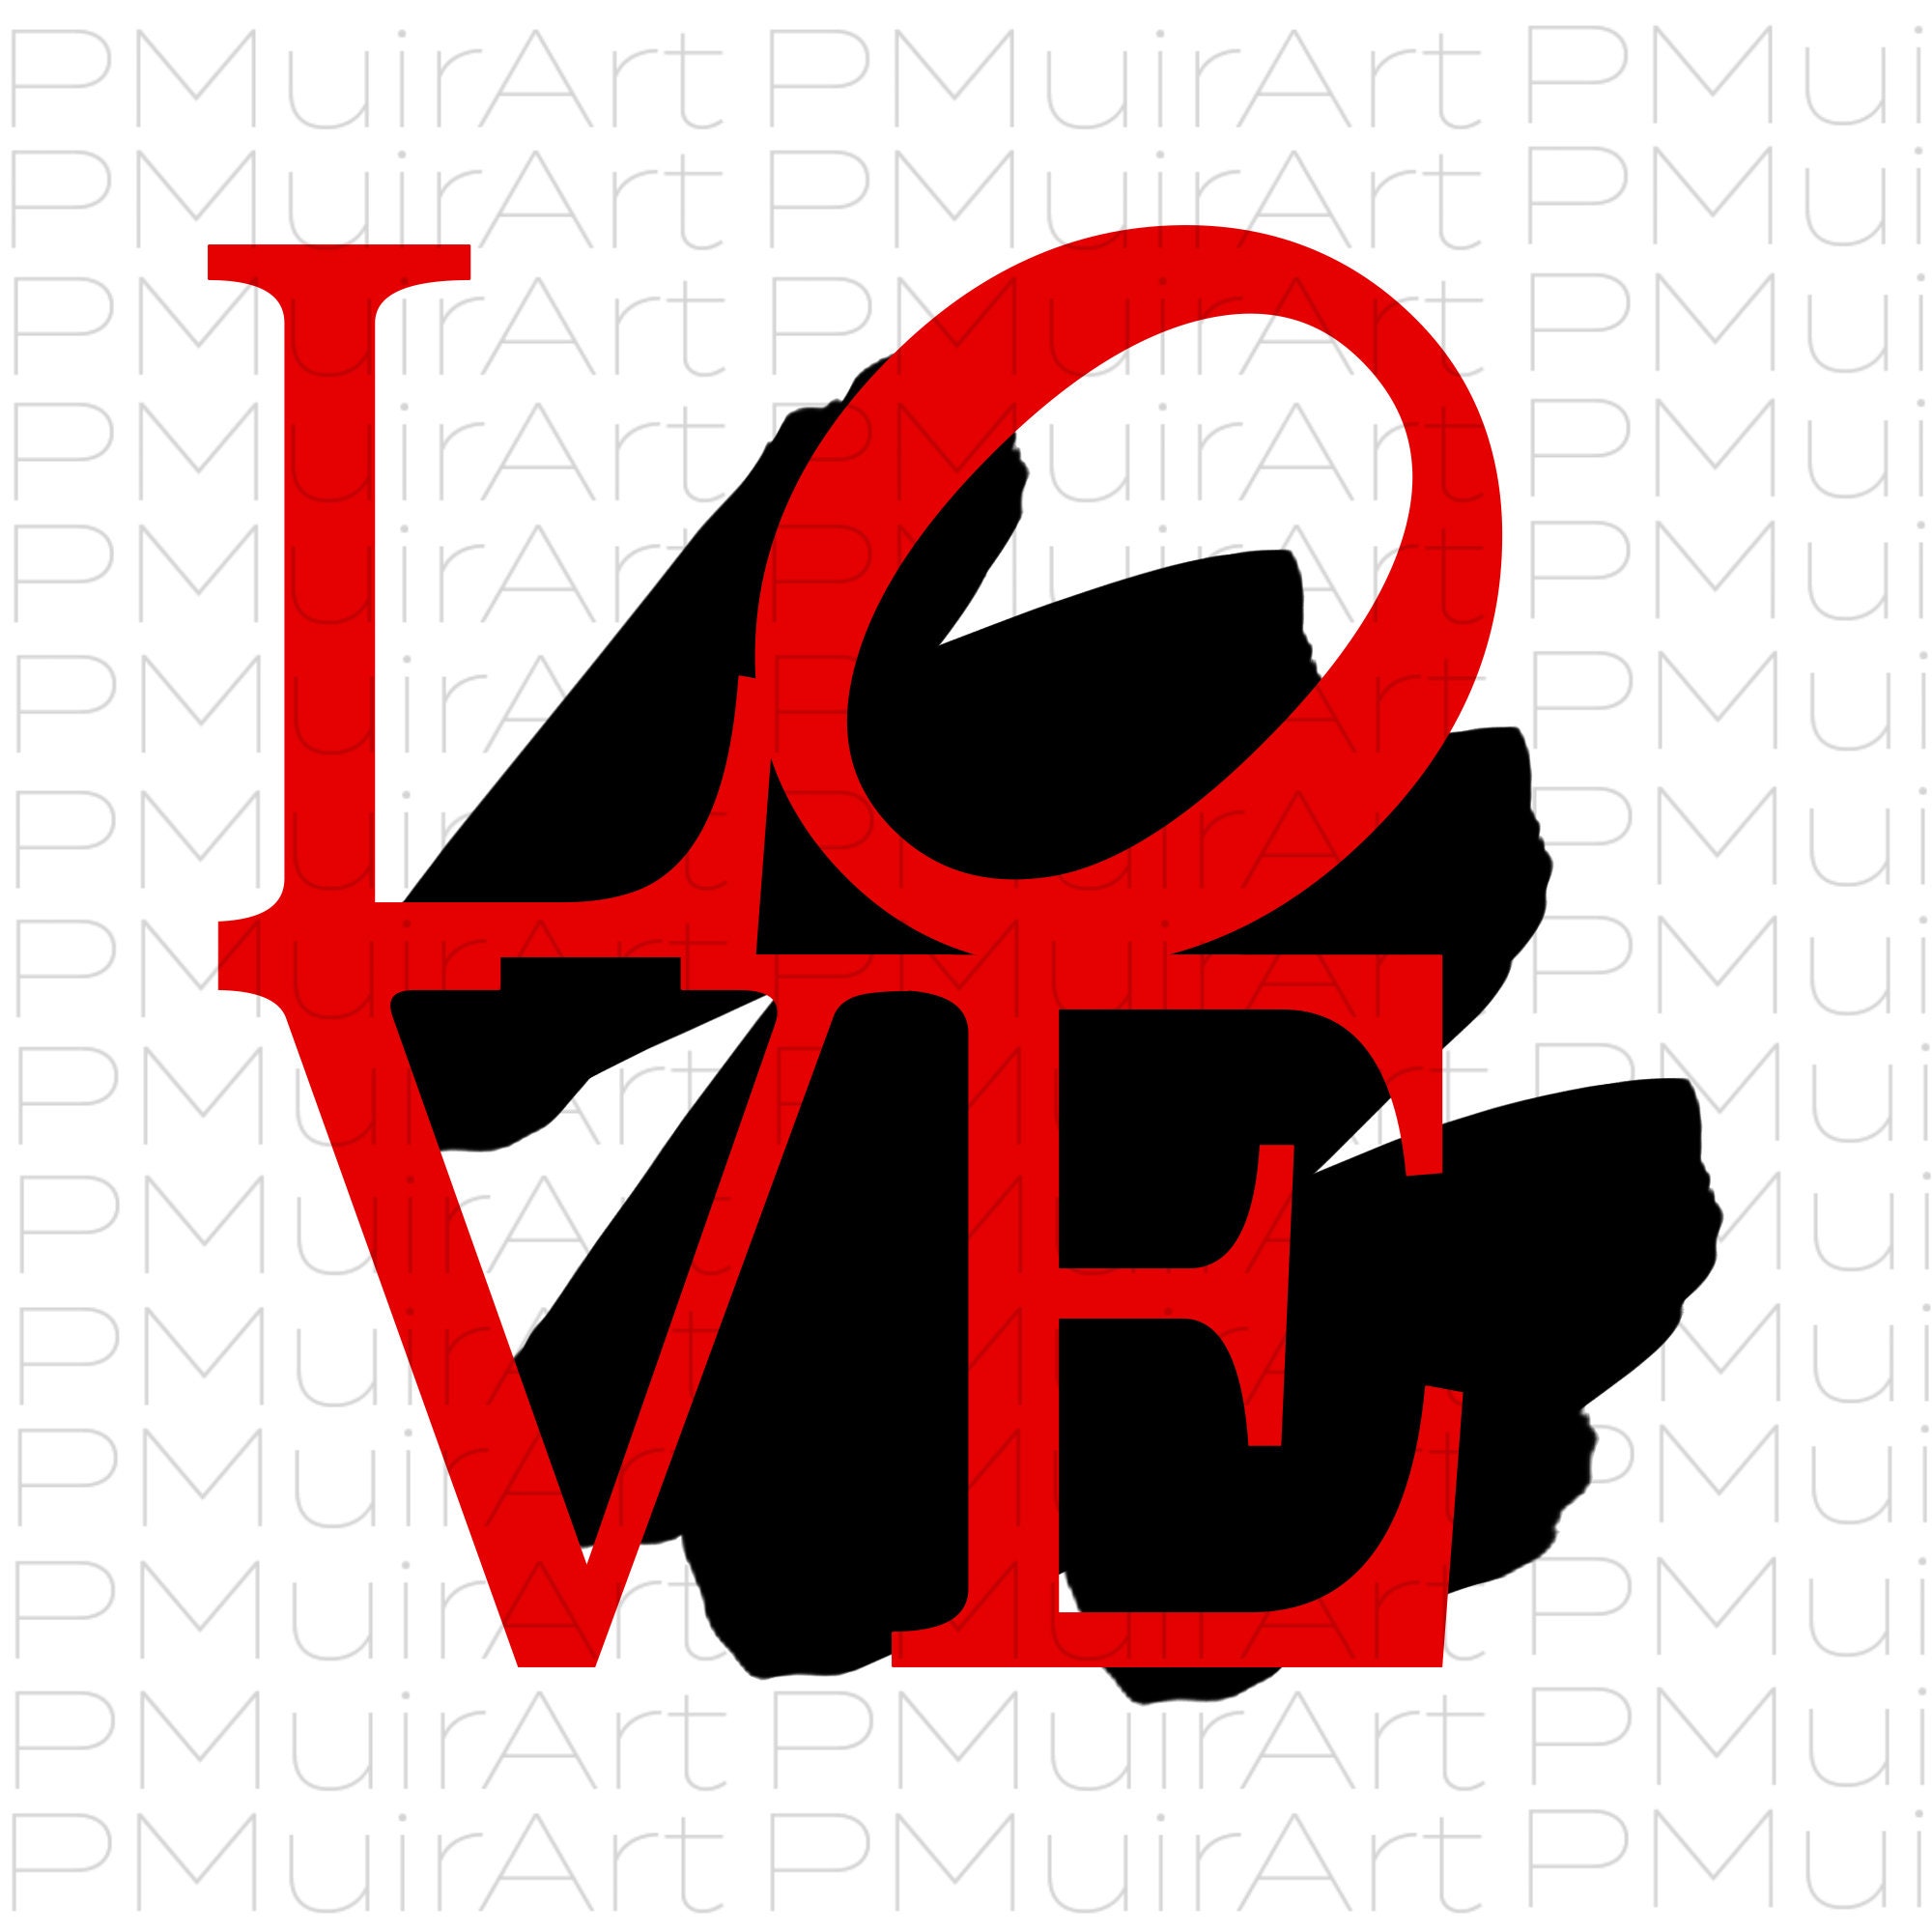 Philly Love Sign Design Download Phl State Designs Etsy